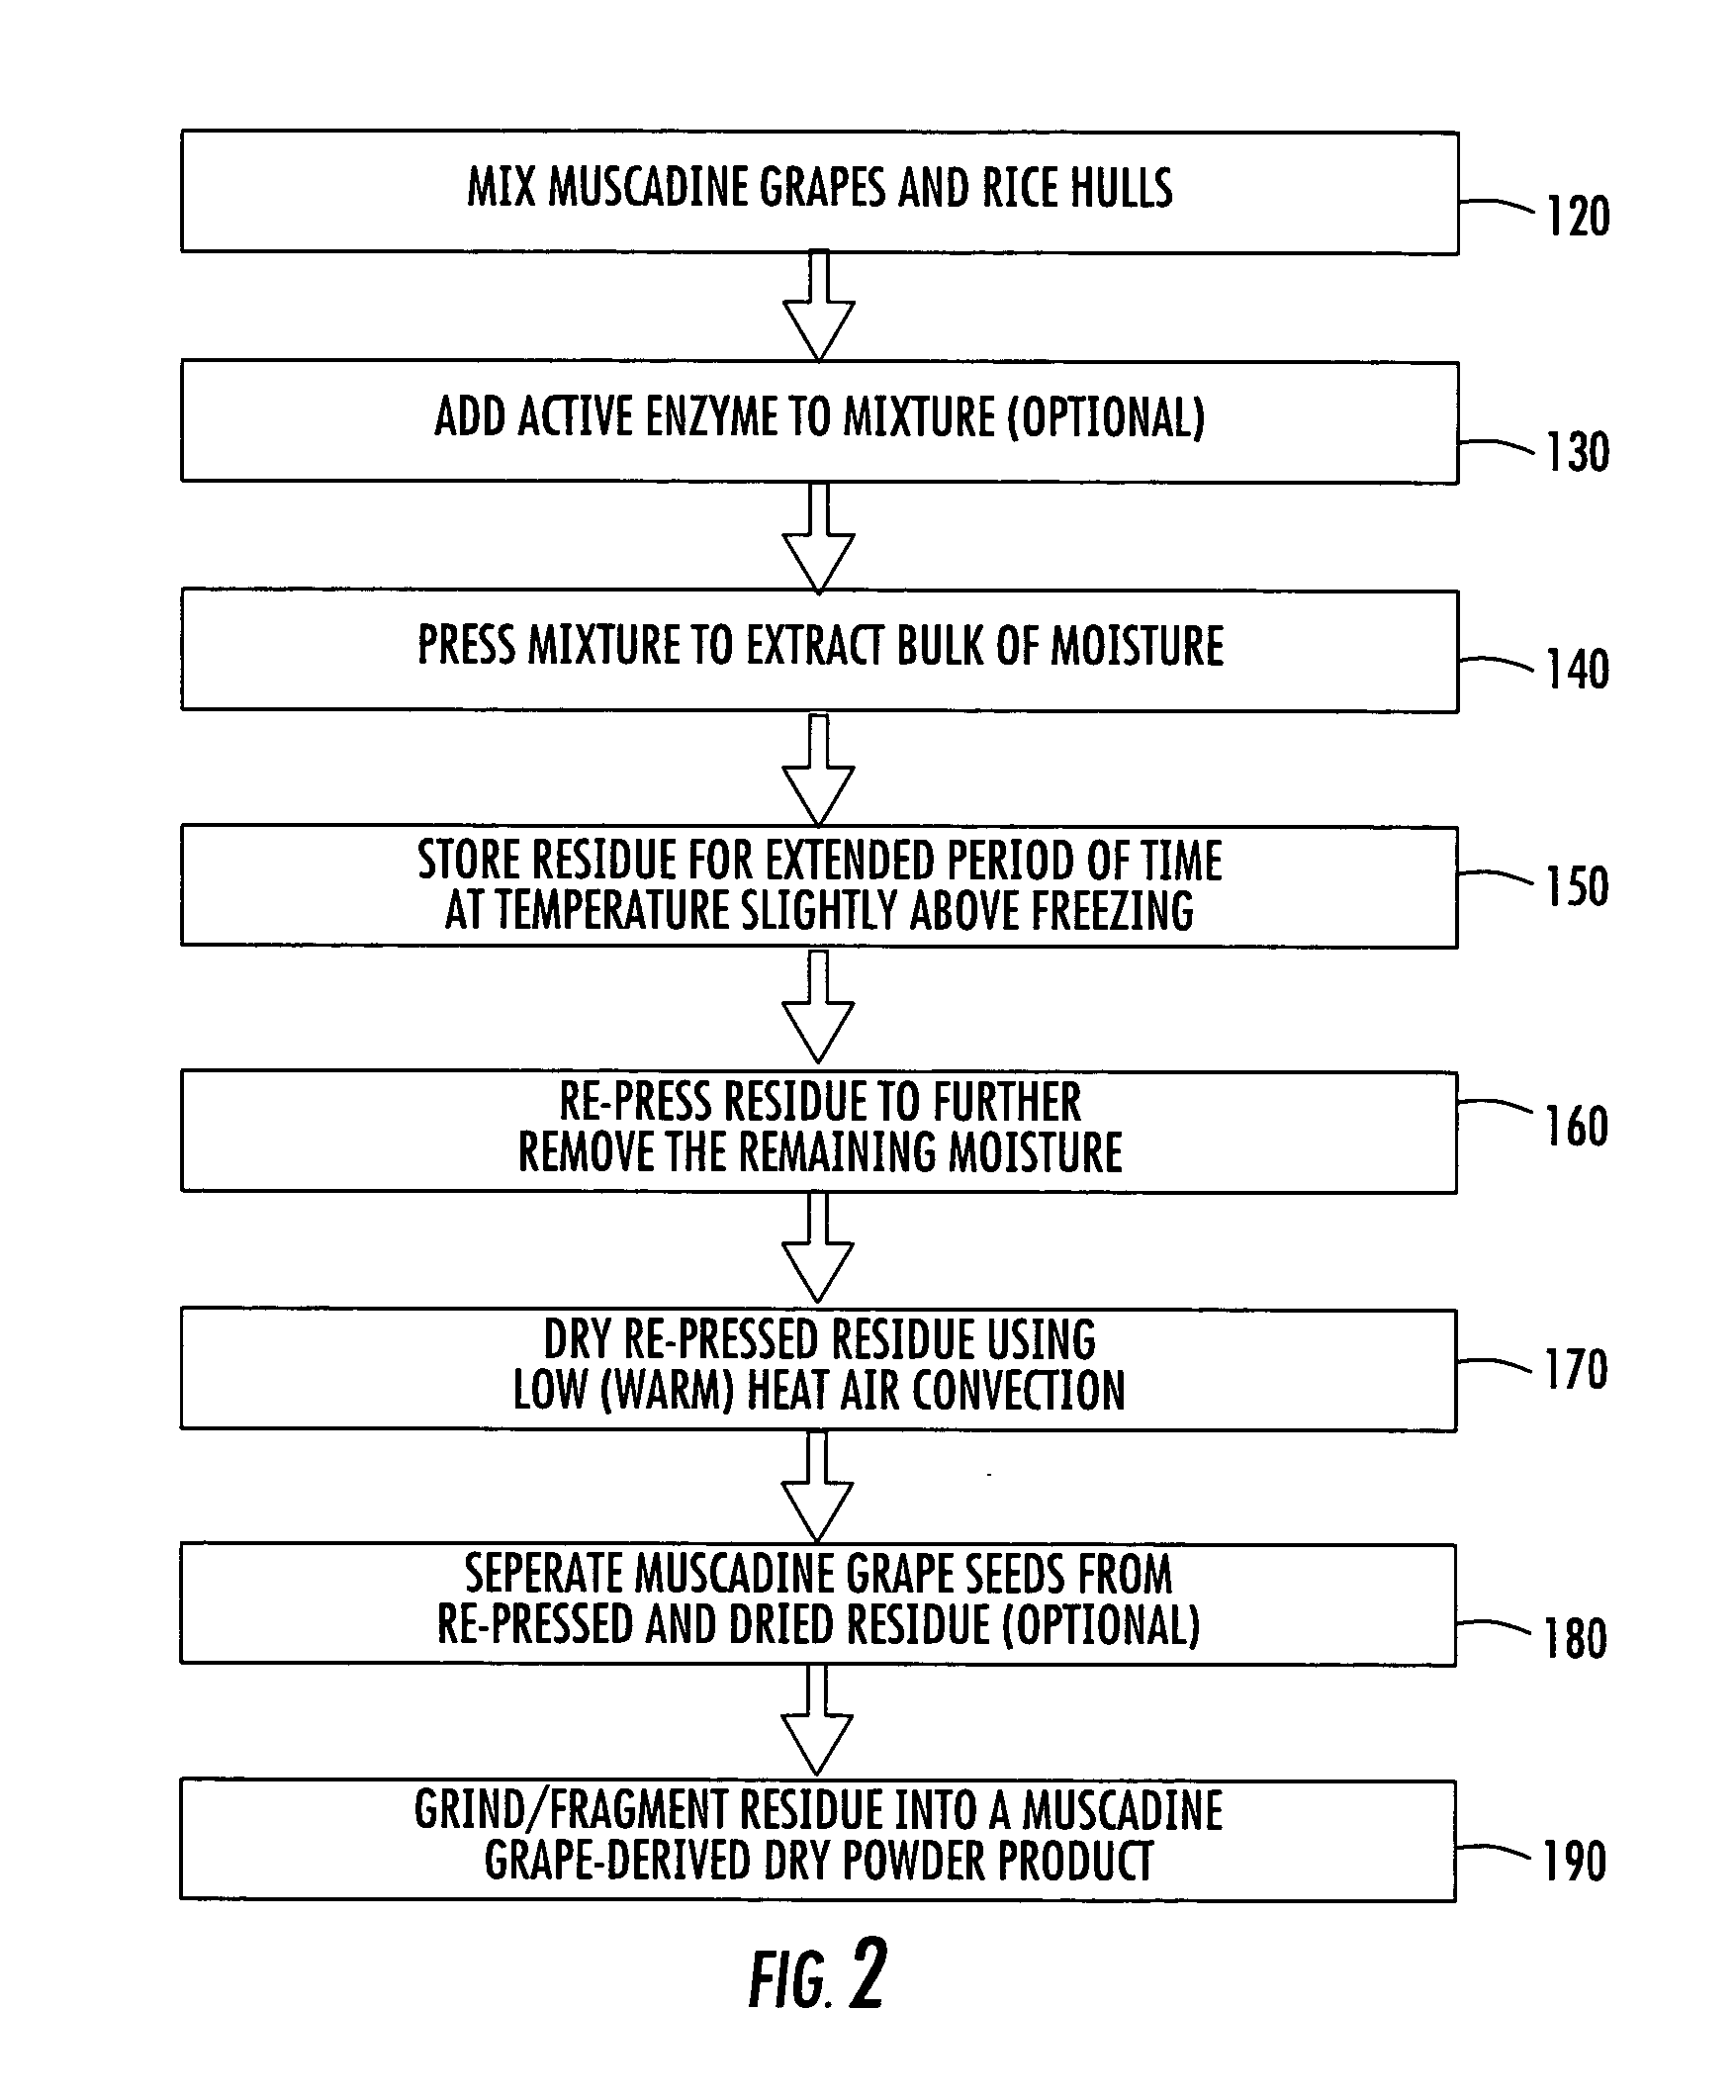 Method for processing organic plant matter into dry powder, oil and juice products